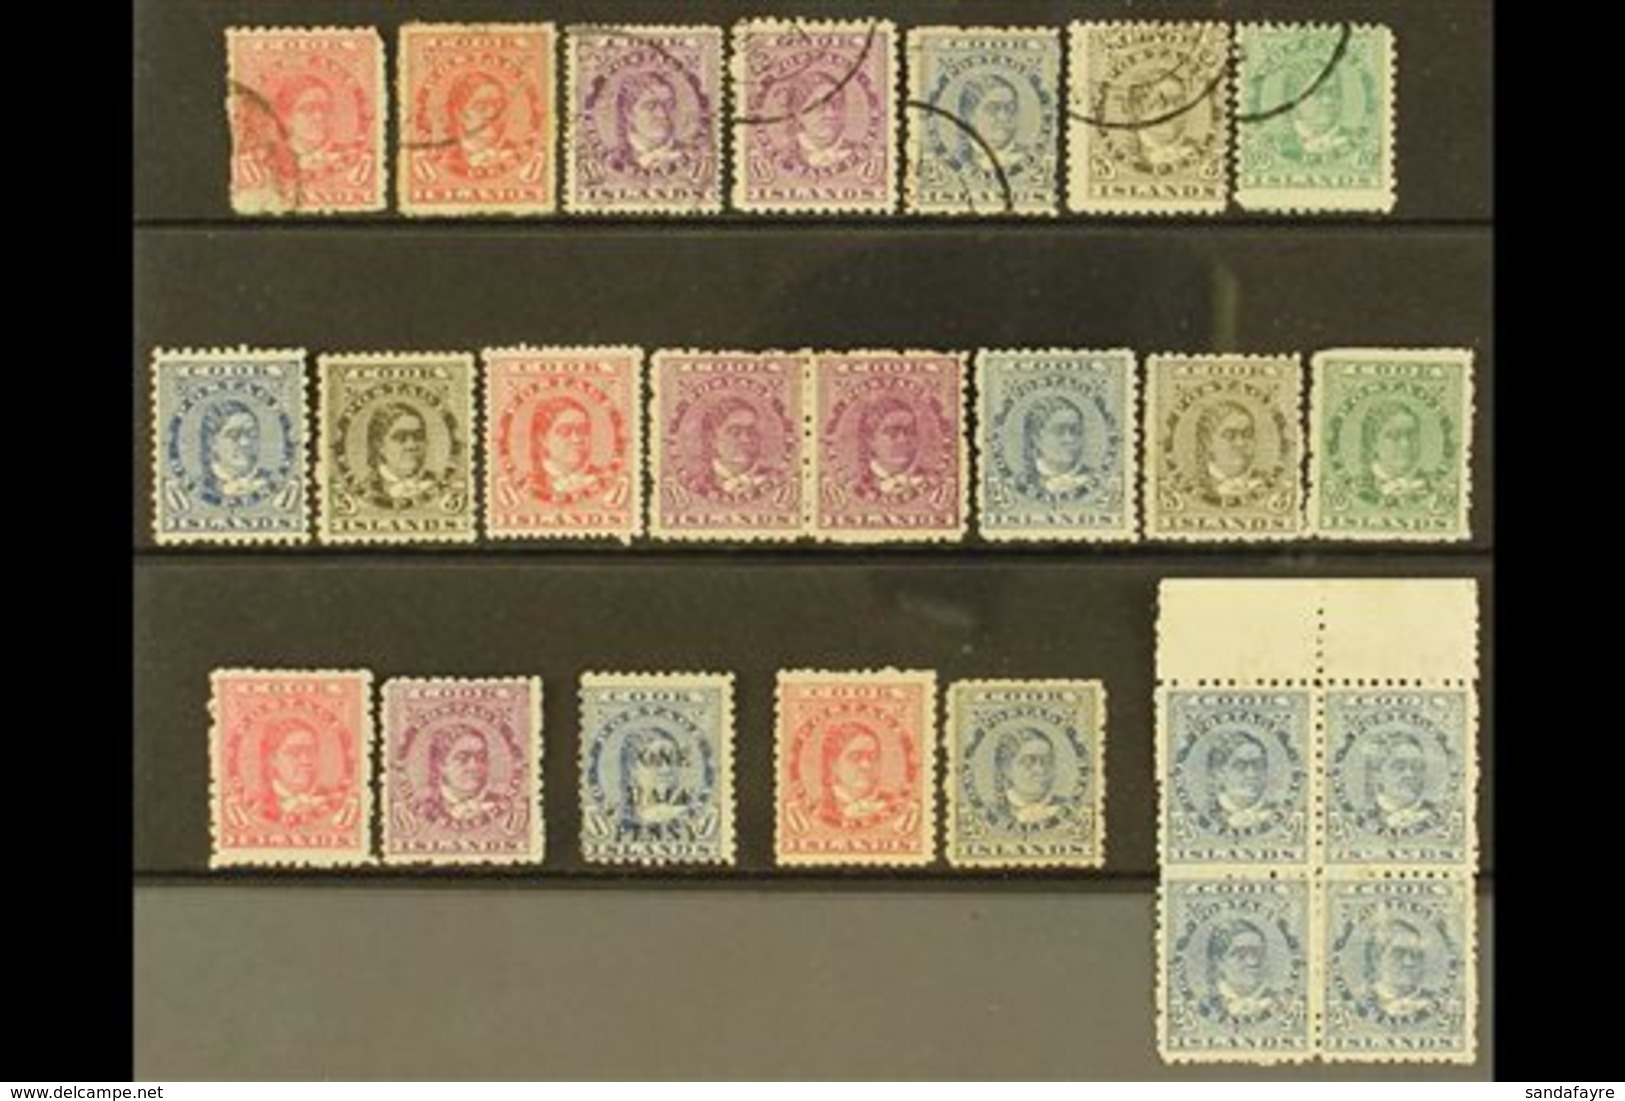 \Y 1893 - 1913 QUEEN MAKEA TAKAU ISSUES\Y 1893 Vals To 5d Olive, Perf 11 Vals To 10d Used, 1899 ½d On 1d Blue, 1902 No W - Cookinseln